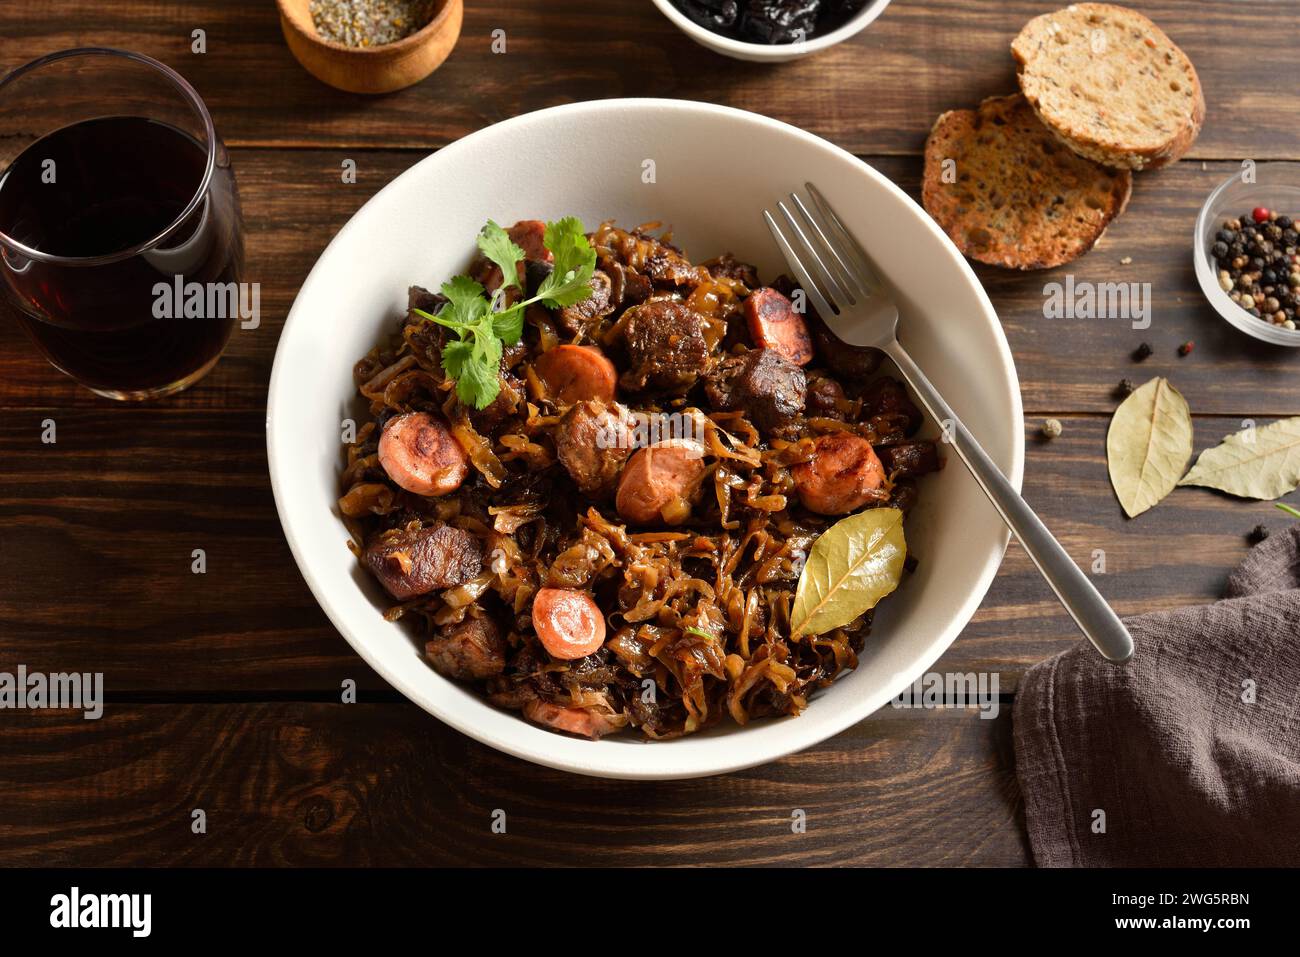 Stewed cabbage (polish bigos) with sauerkraut, mushrooms, smoked meats and spices in bowl over wooden background. Close up view Stock Photo